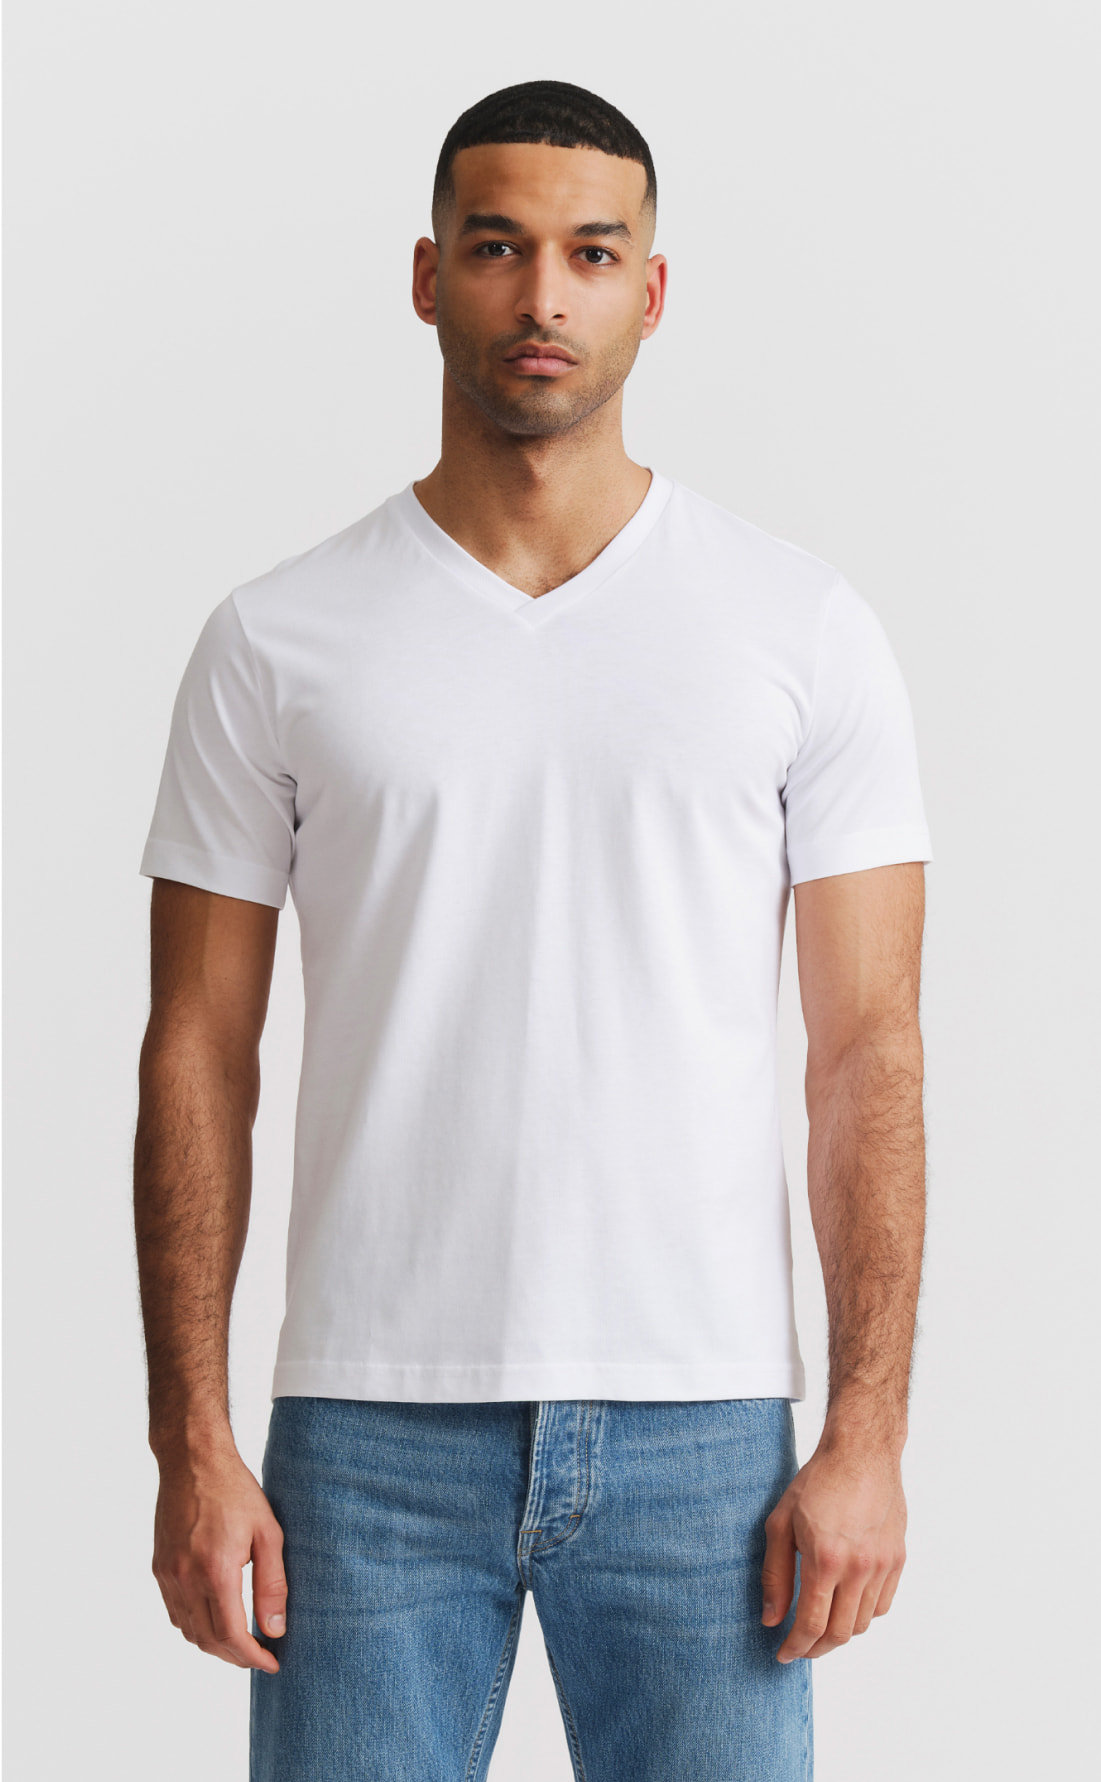 Custom Fitted Cotton T-Shirt V-Neck Crew